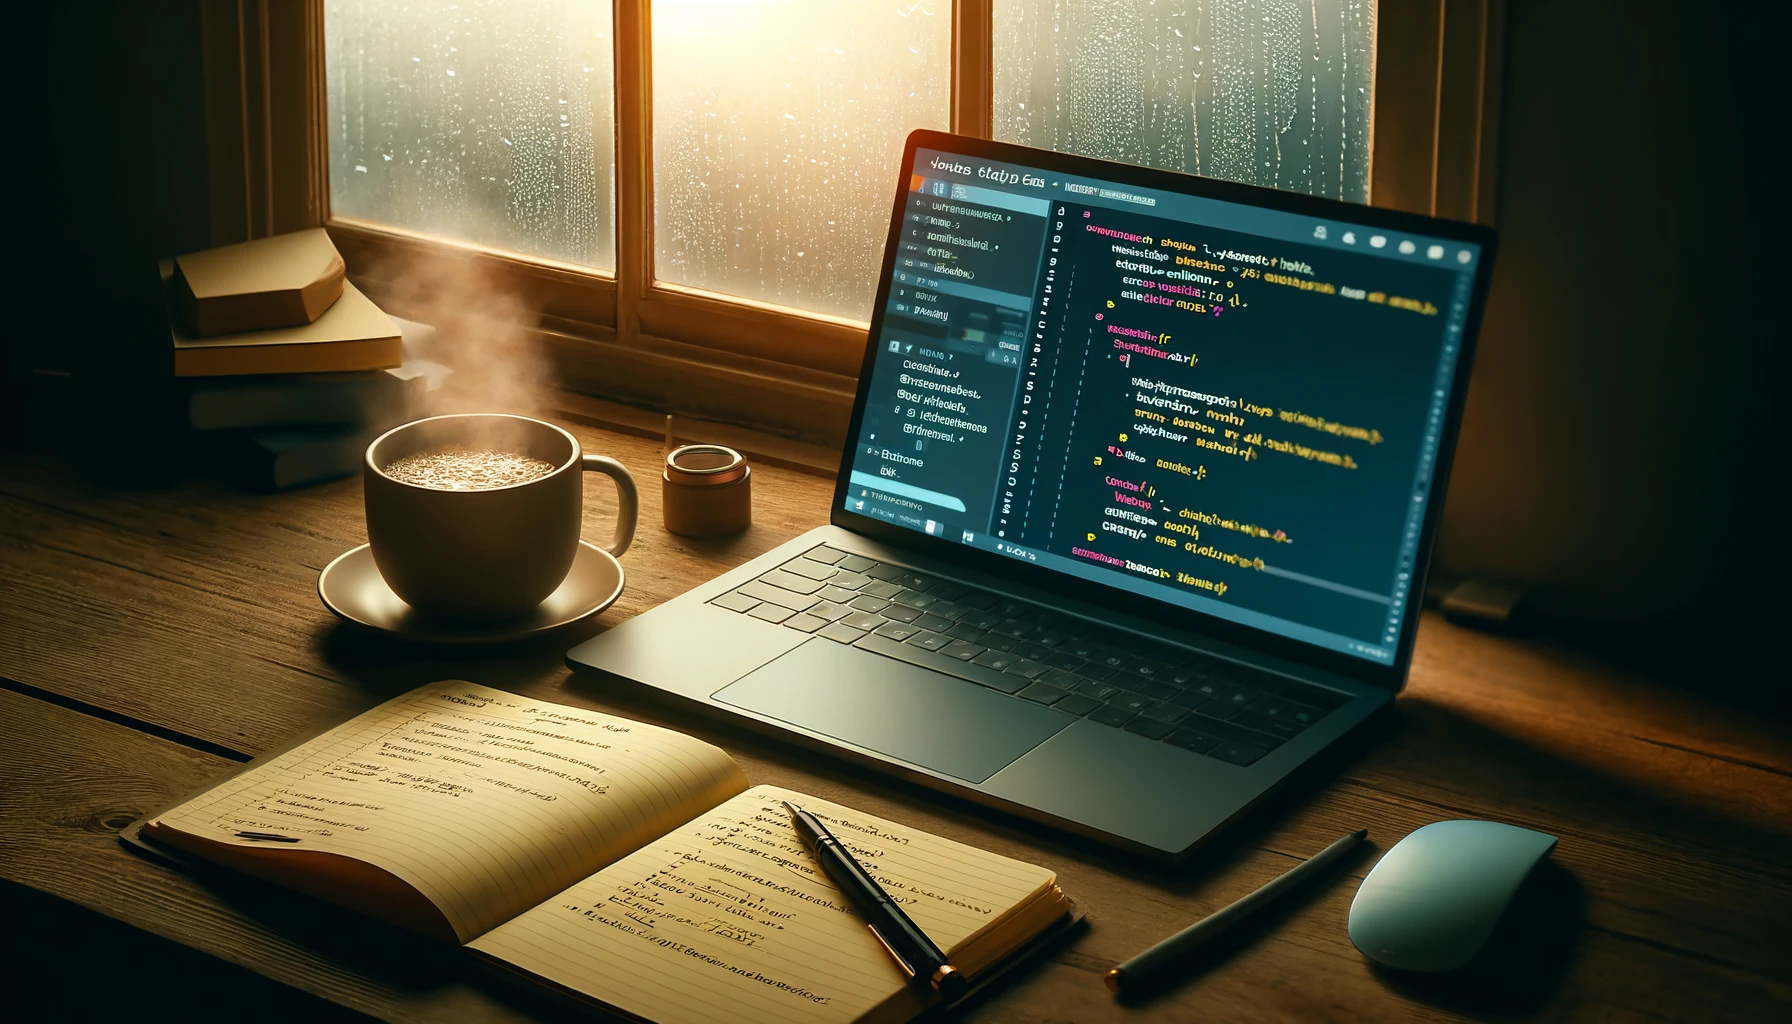 An image depicting a cozy study setup with a laptop open to a JavaScript coding tutorial, a notepad, a cup of coffee, and a view of a rainy window.